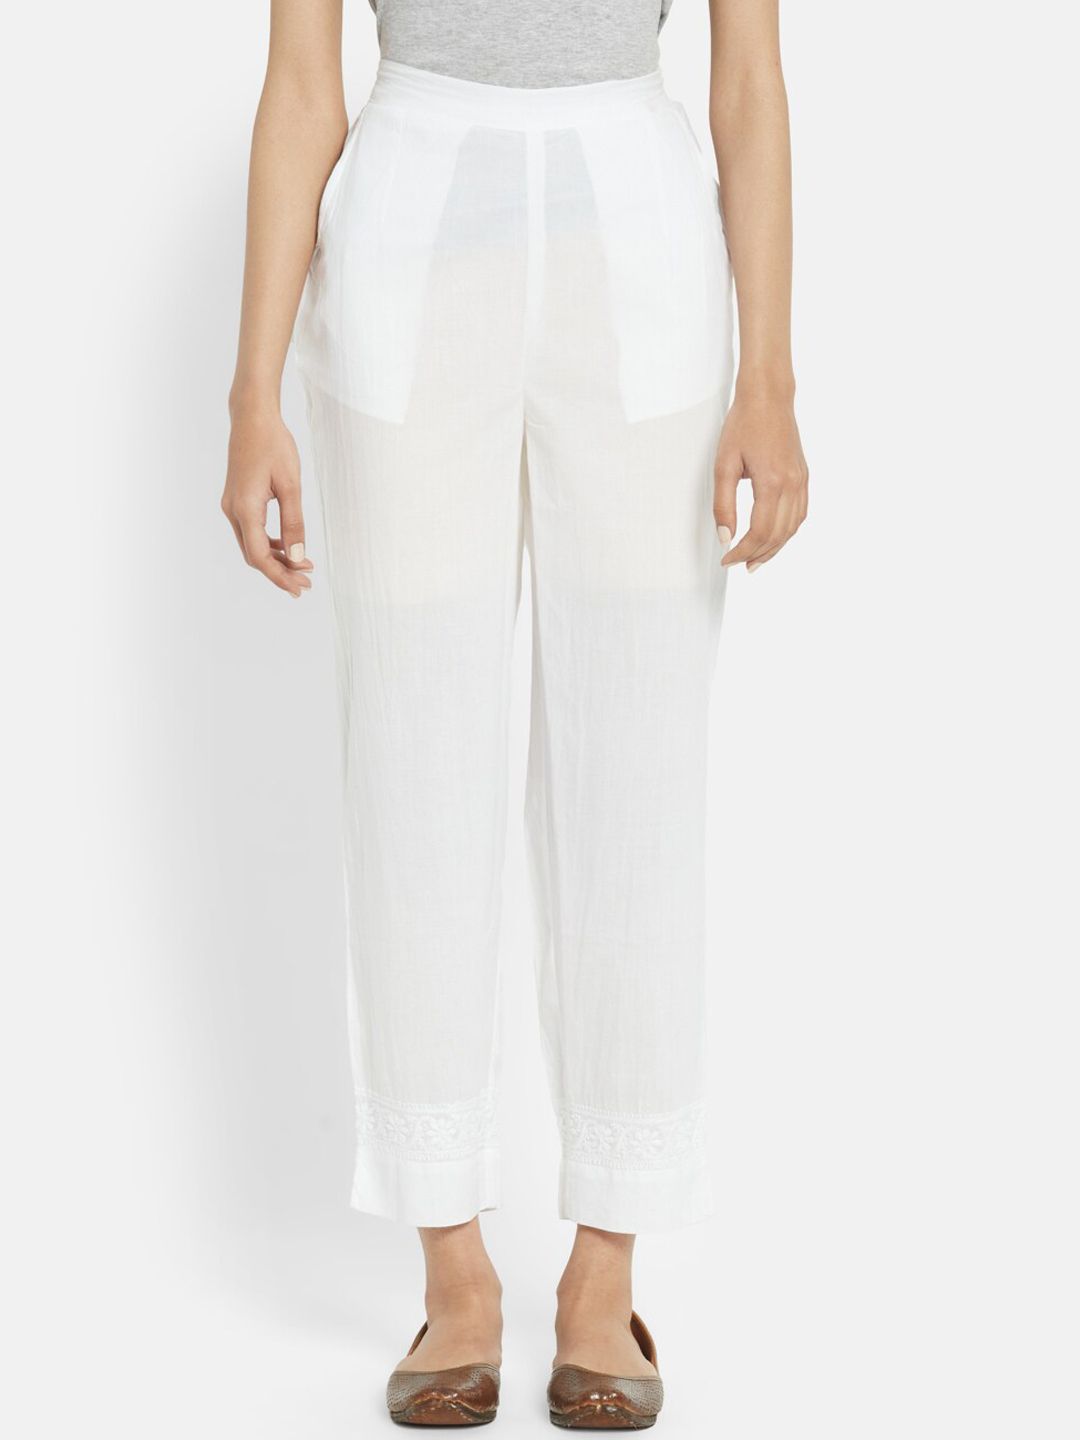 Fabindia Women White Embroidered Cotton Trousers Price in India